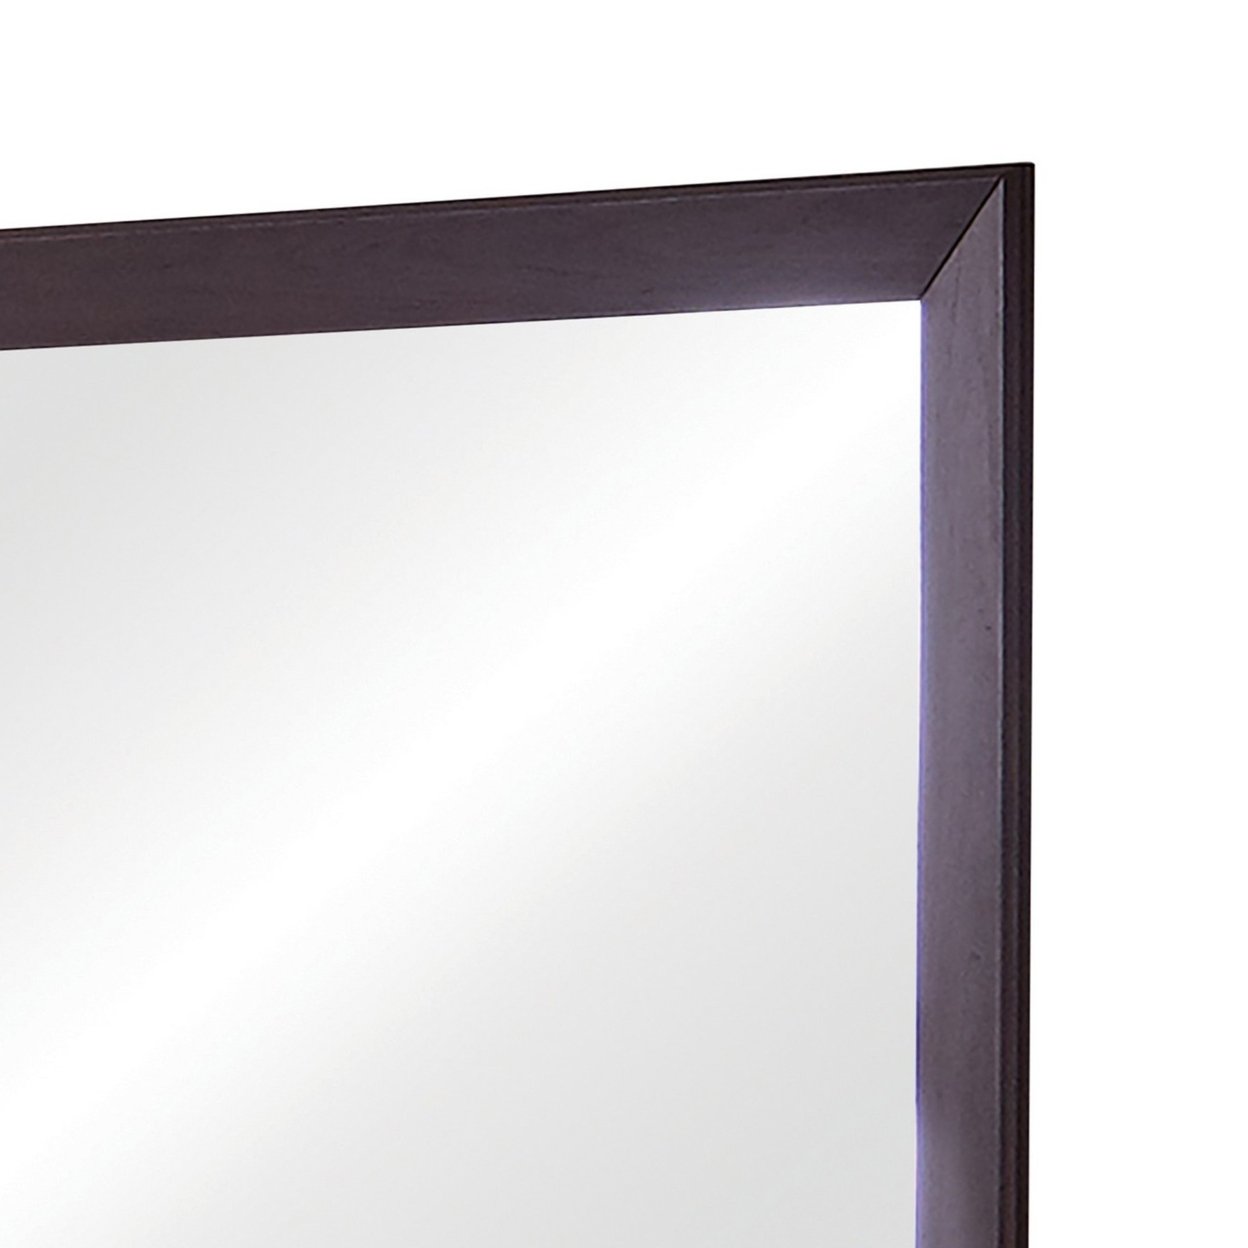 Mirror With Wooden Frame And Mounting Hardware, Espresso Brown- Saltoro Sherpi